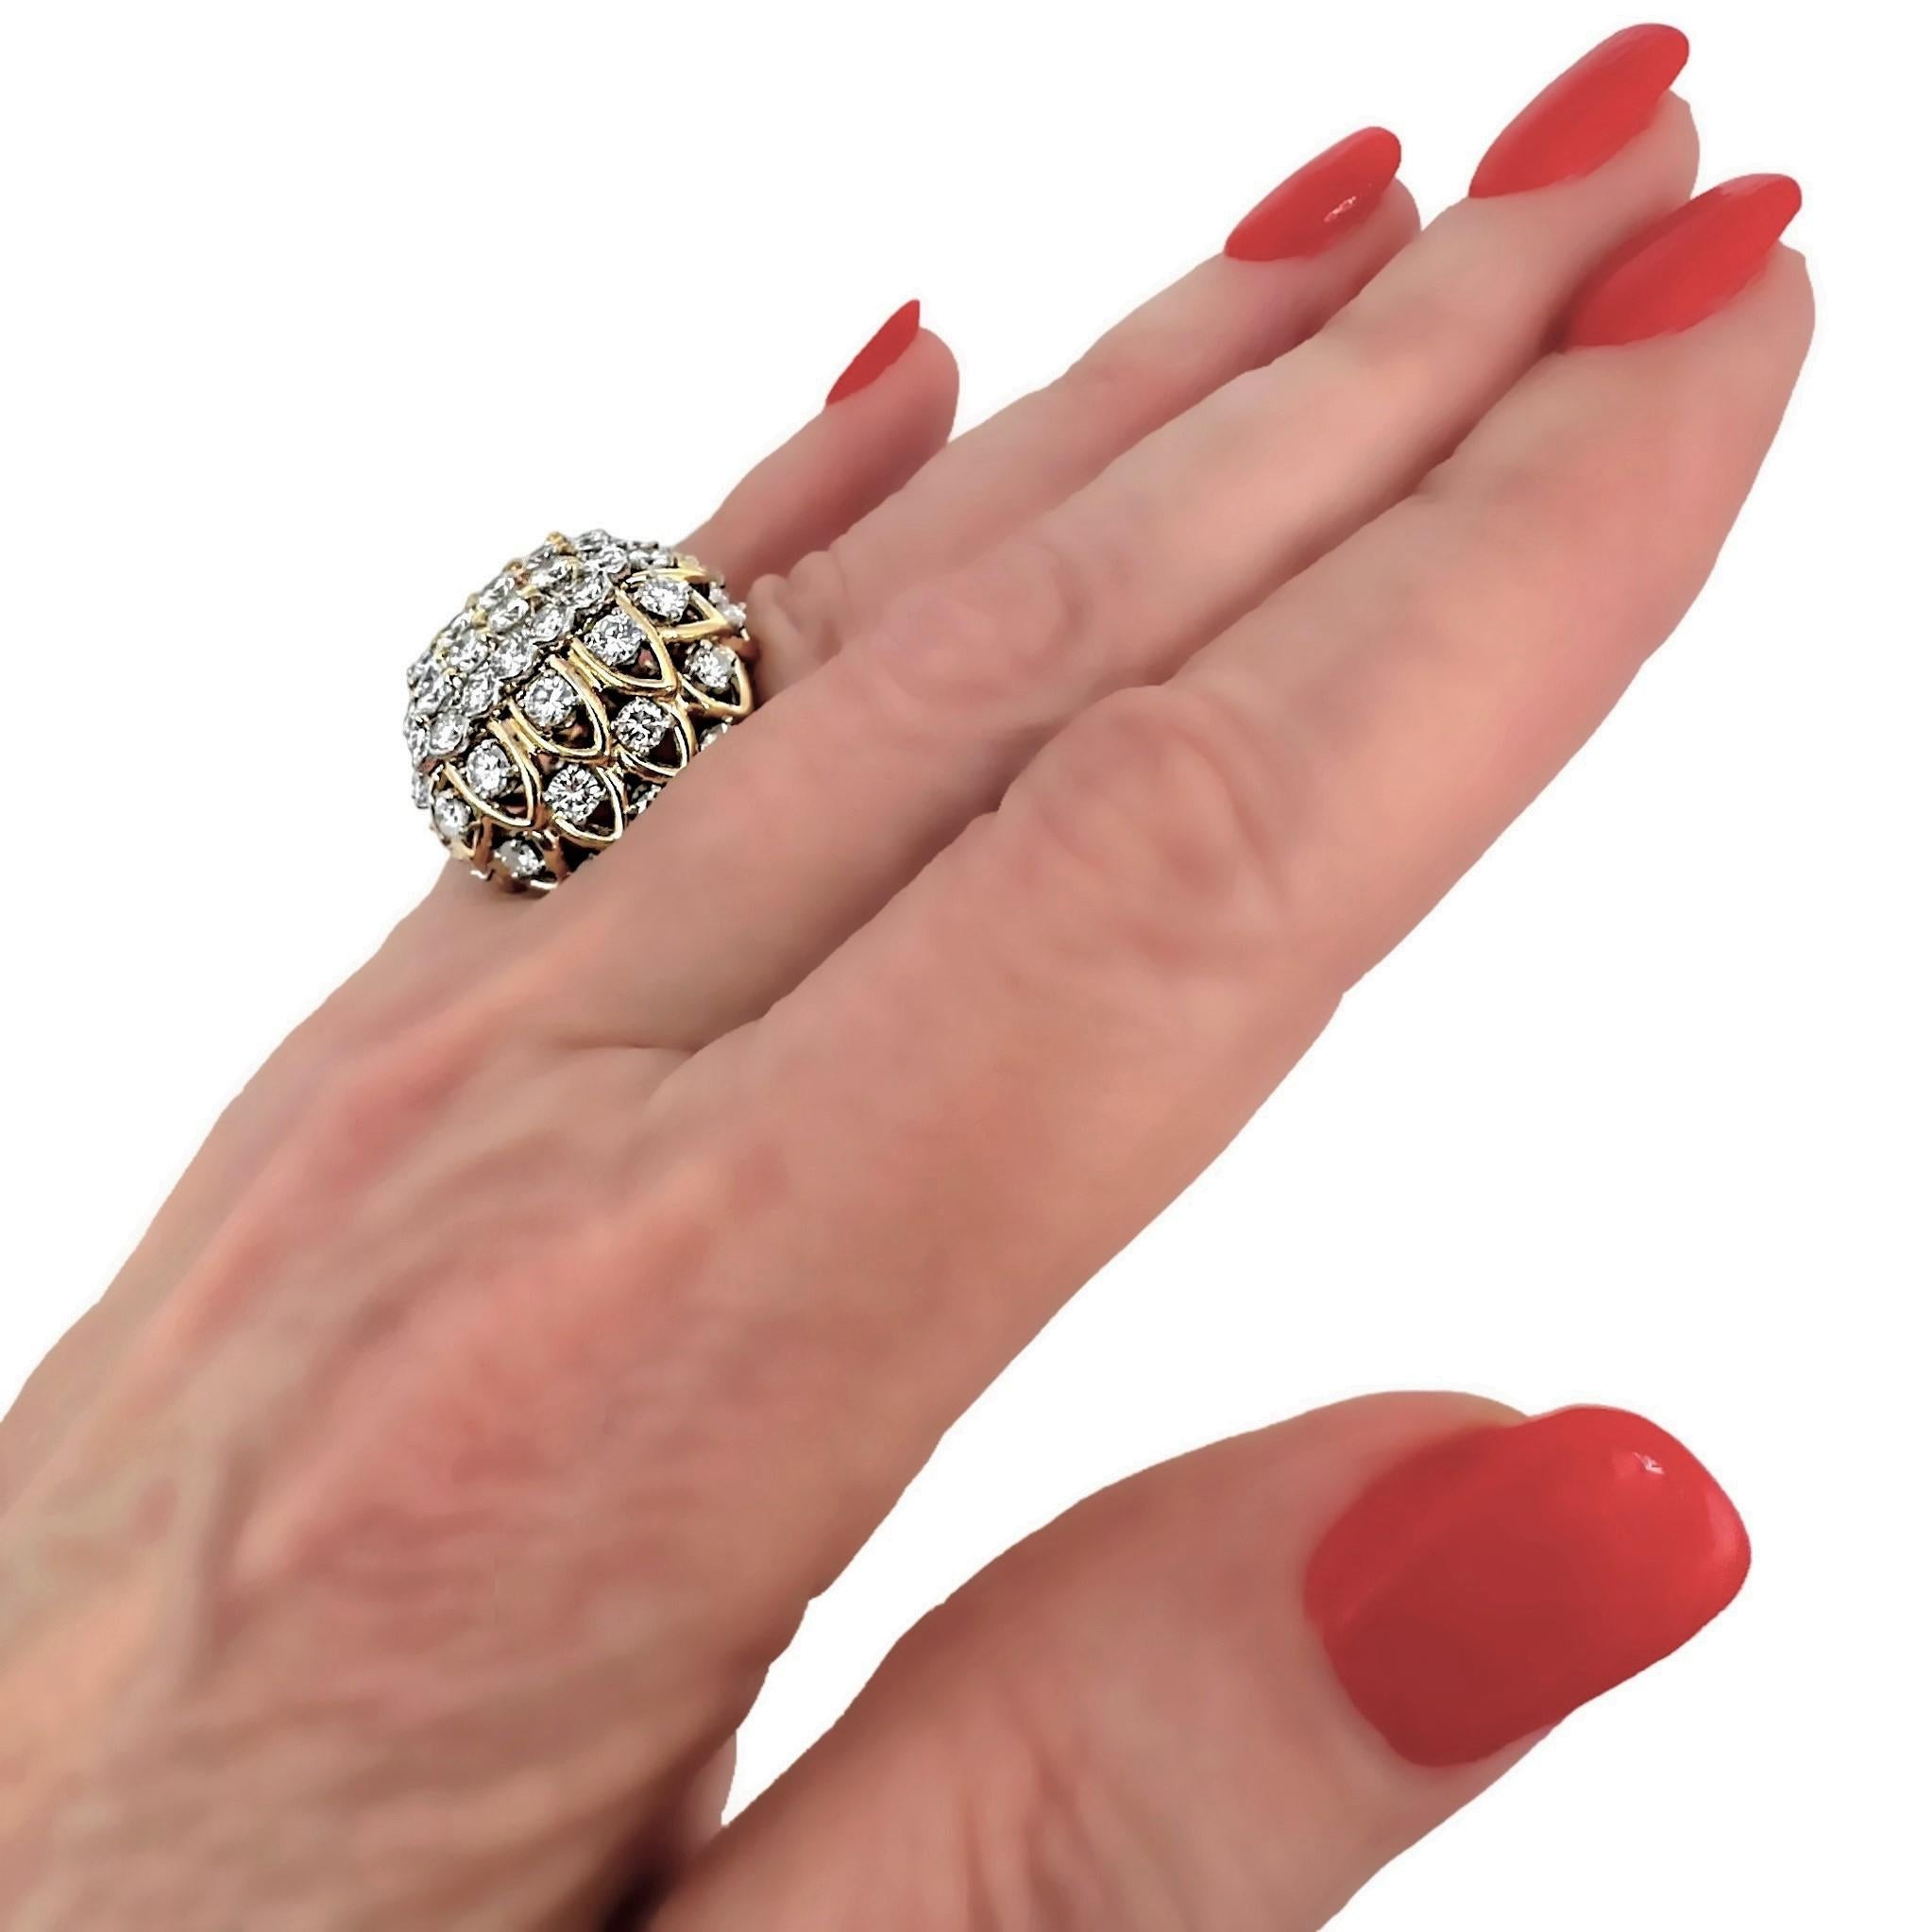 Large Scale 1970s Diamond Platinum and Gold Cocktail Ring 8.5carats Total For Sale 3